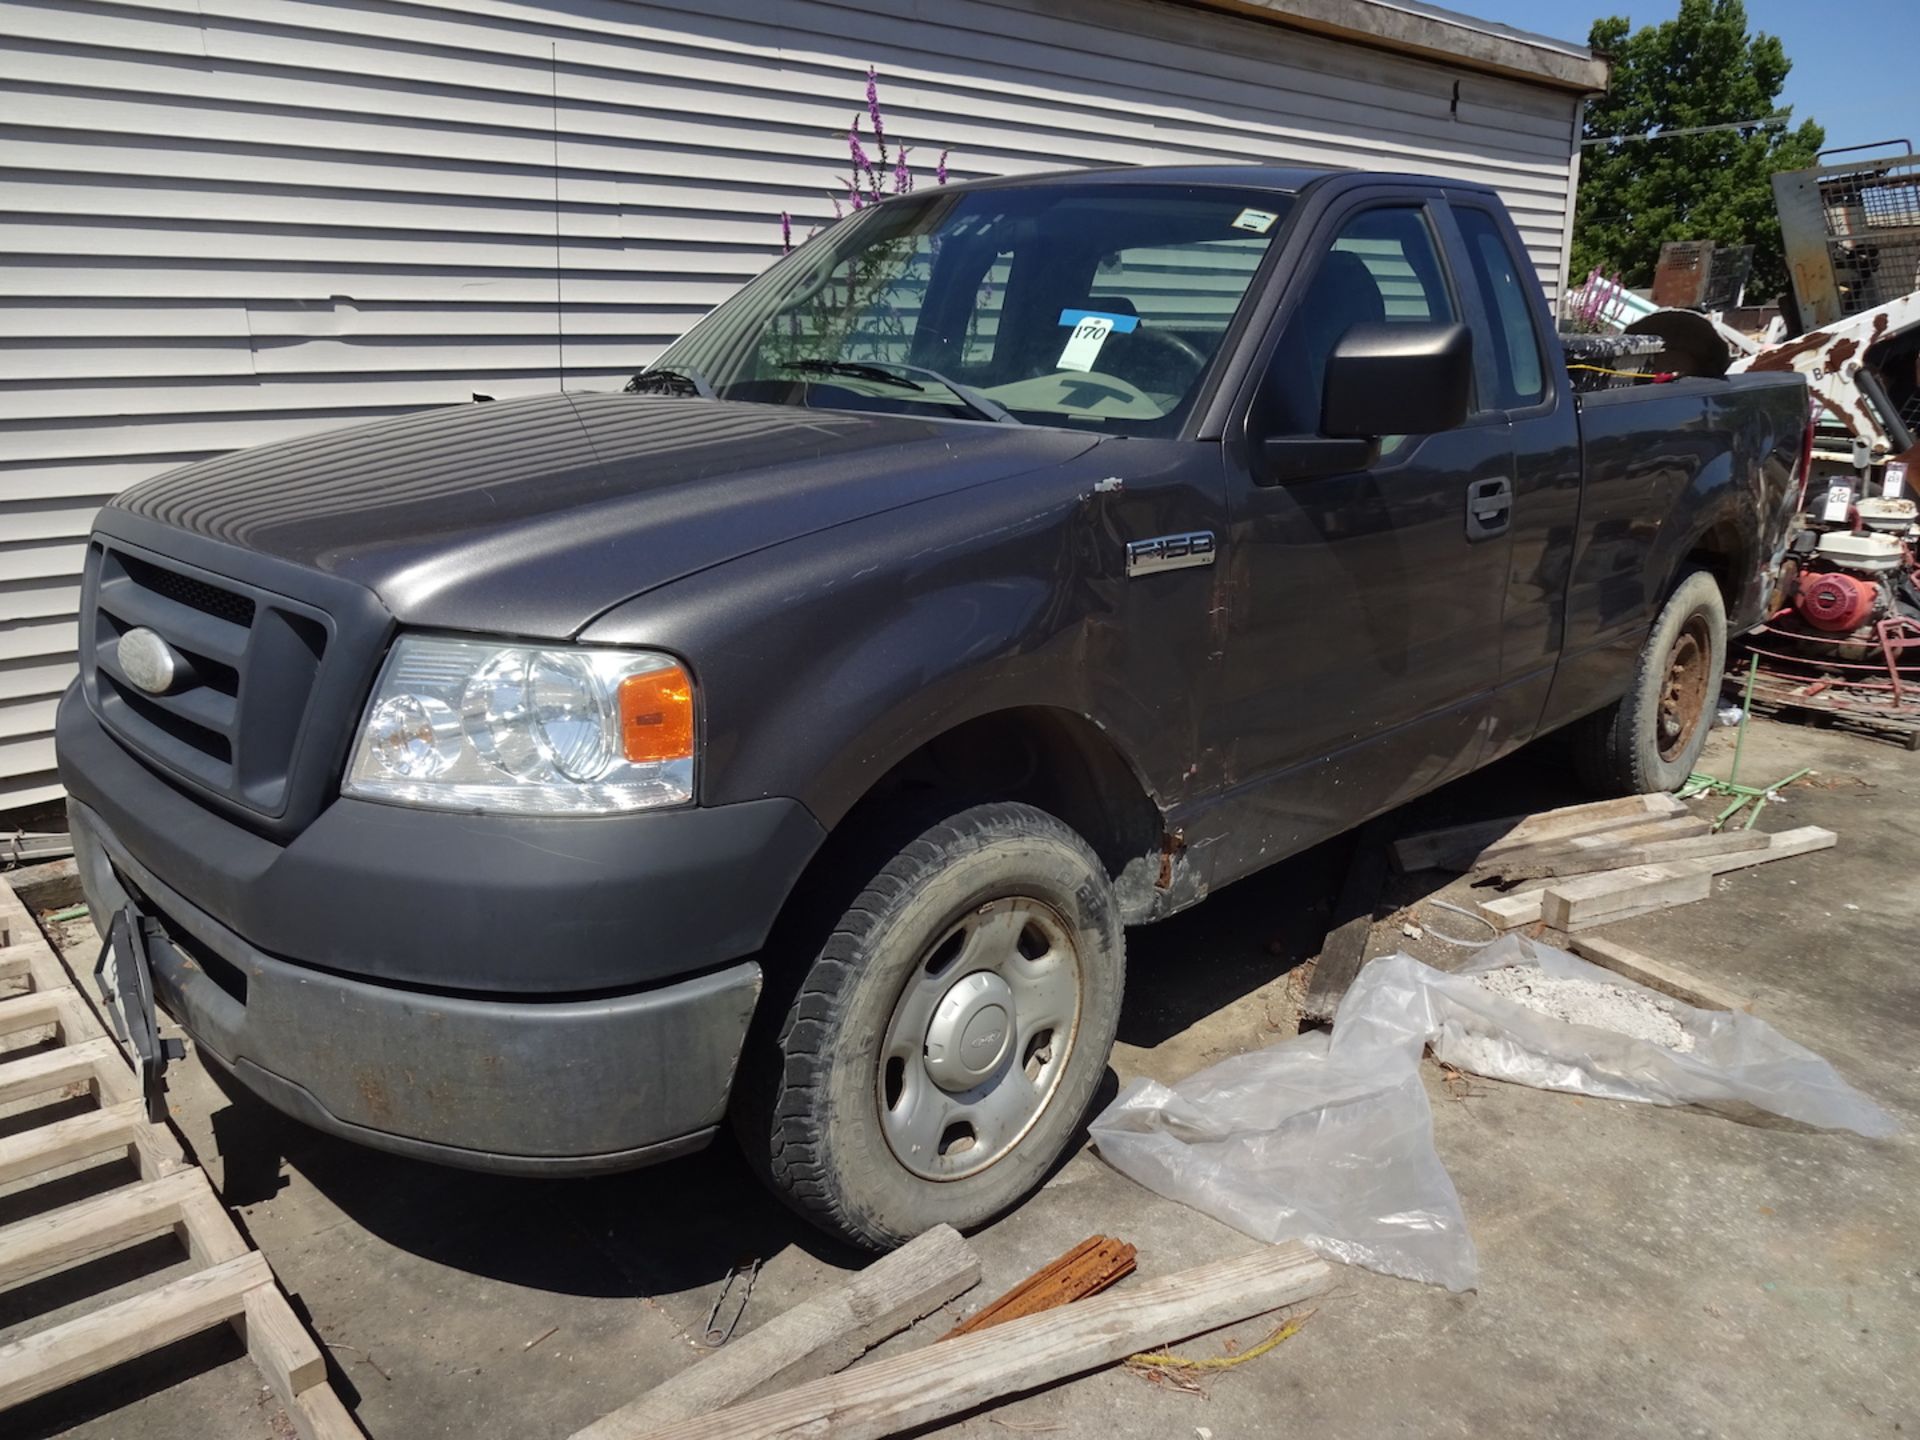 2007 FORD PICKUP TRUCK, MODEL F150, VIN: 1FTRF12287KC34296, 1/2 TON, AUTOMATIC, AC, GRAY EXTERIOR,